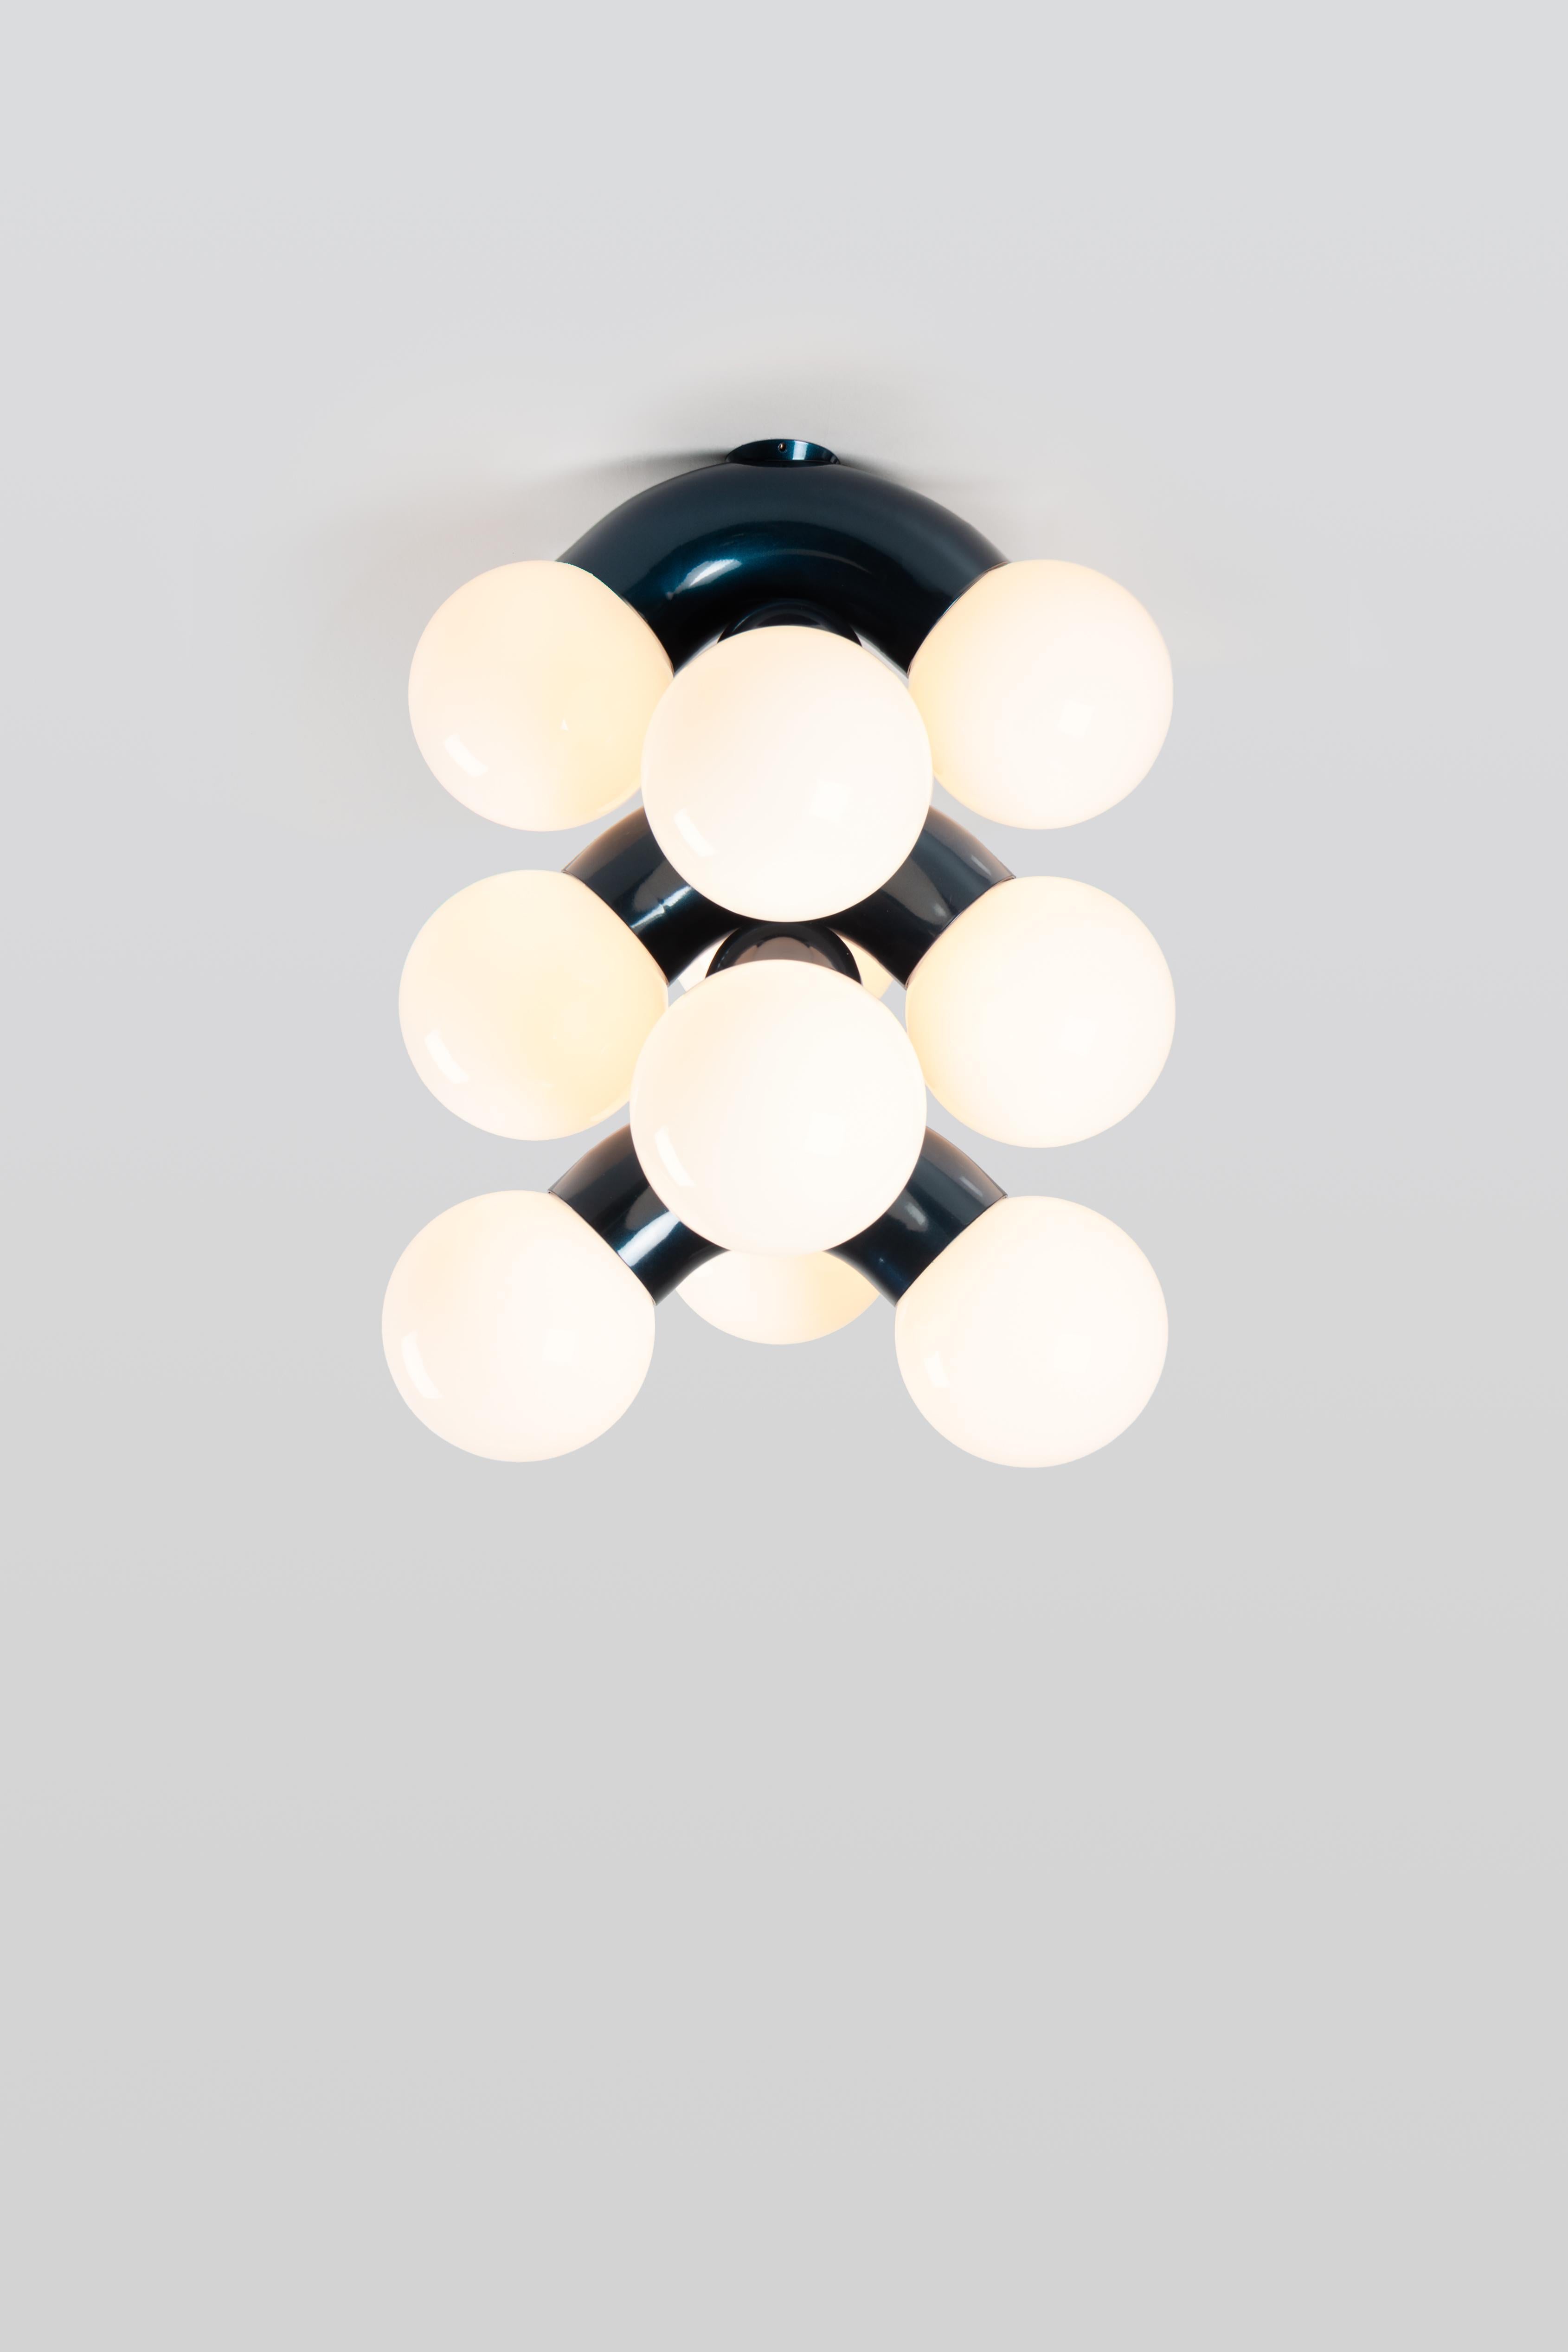 VINE 5-C, ceiling lamp
Design: Caine Heintzman, Editor: ANDLight

The vine ceiling lamp combines exaggerated form with the propensity for repetition resulting in an ambitious vertically scaling fixture.

Materials
– Chromed steel
– Opal glass